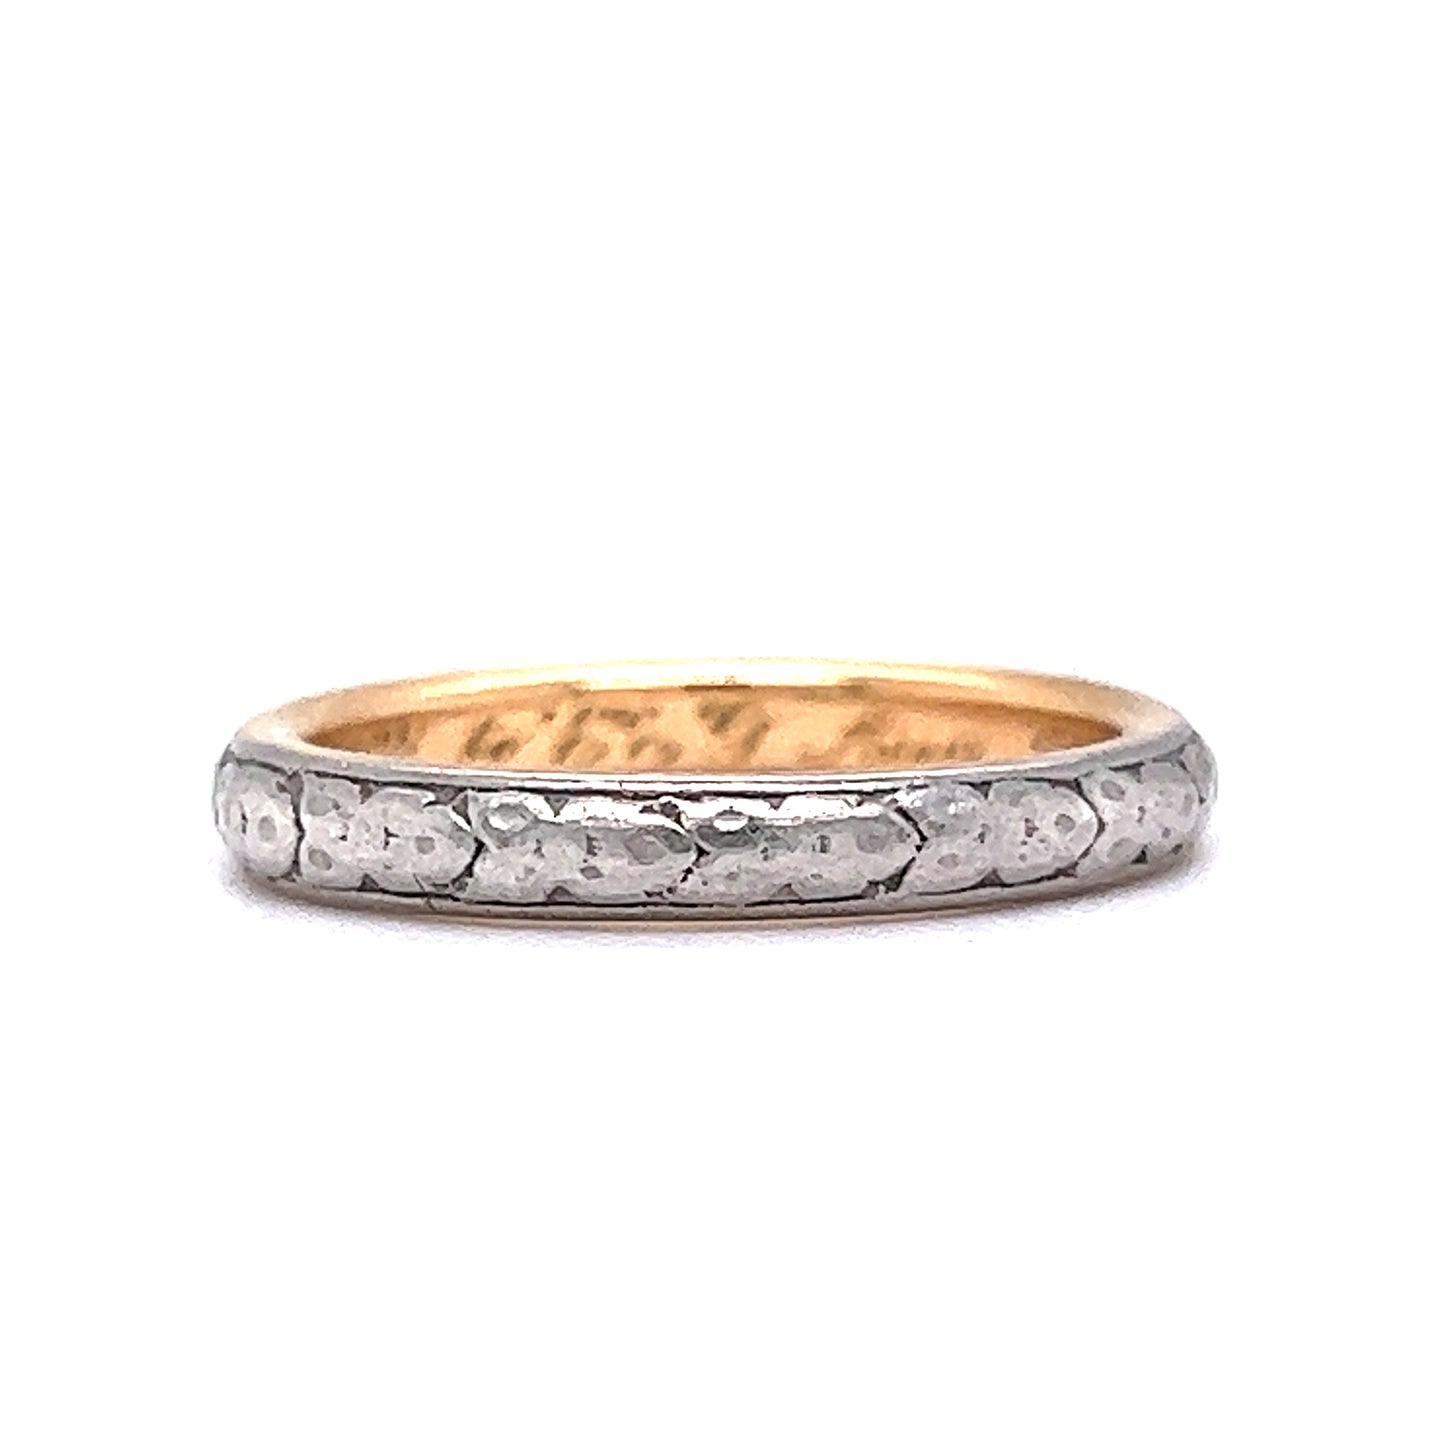 1900's Antique Engraved Wedding Band in 18k White & Yellow Gold